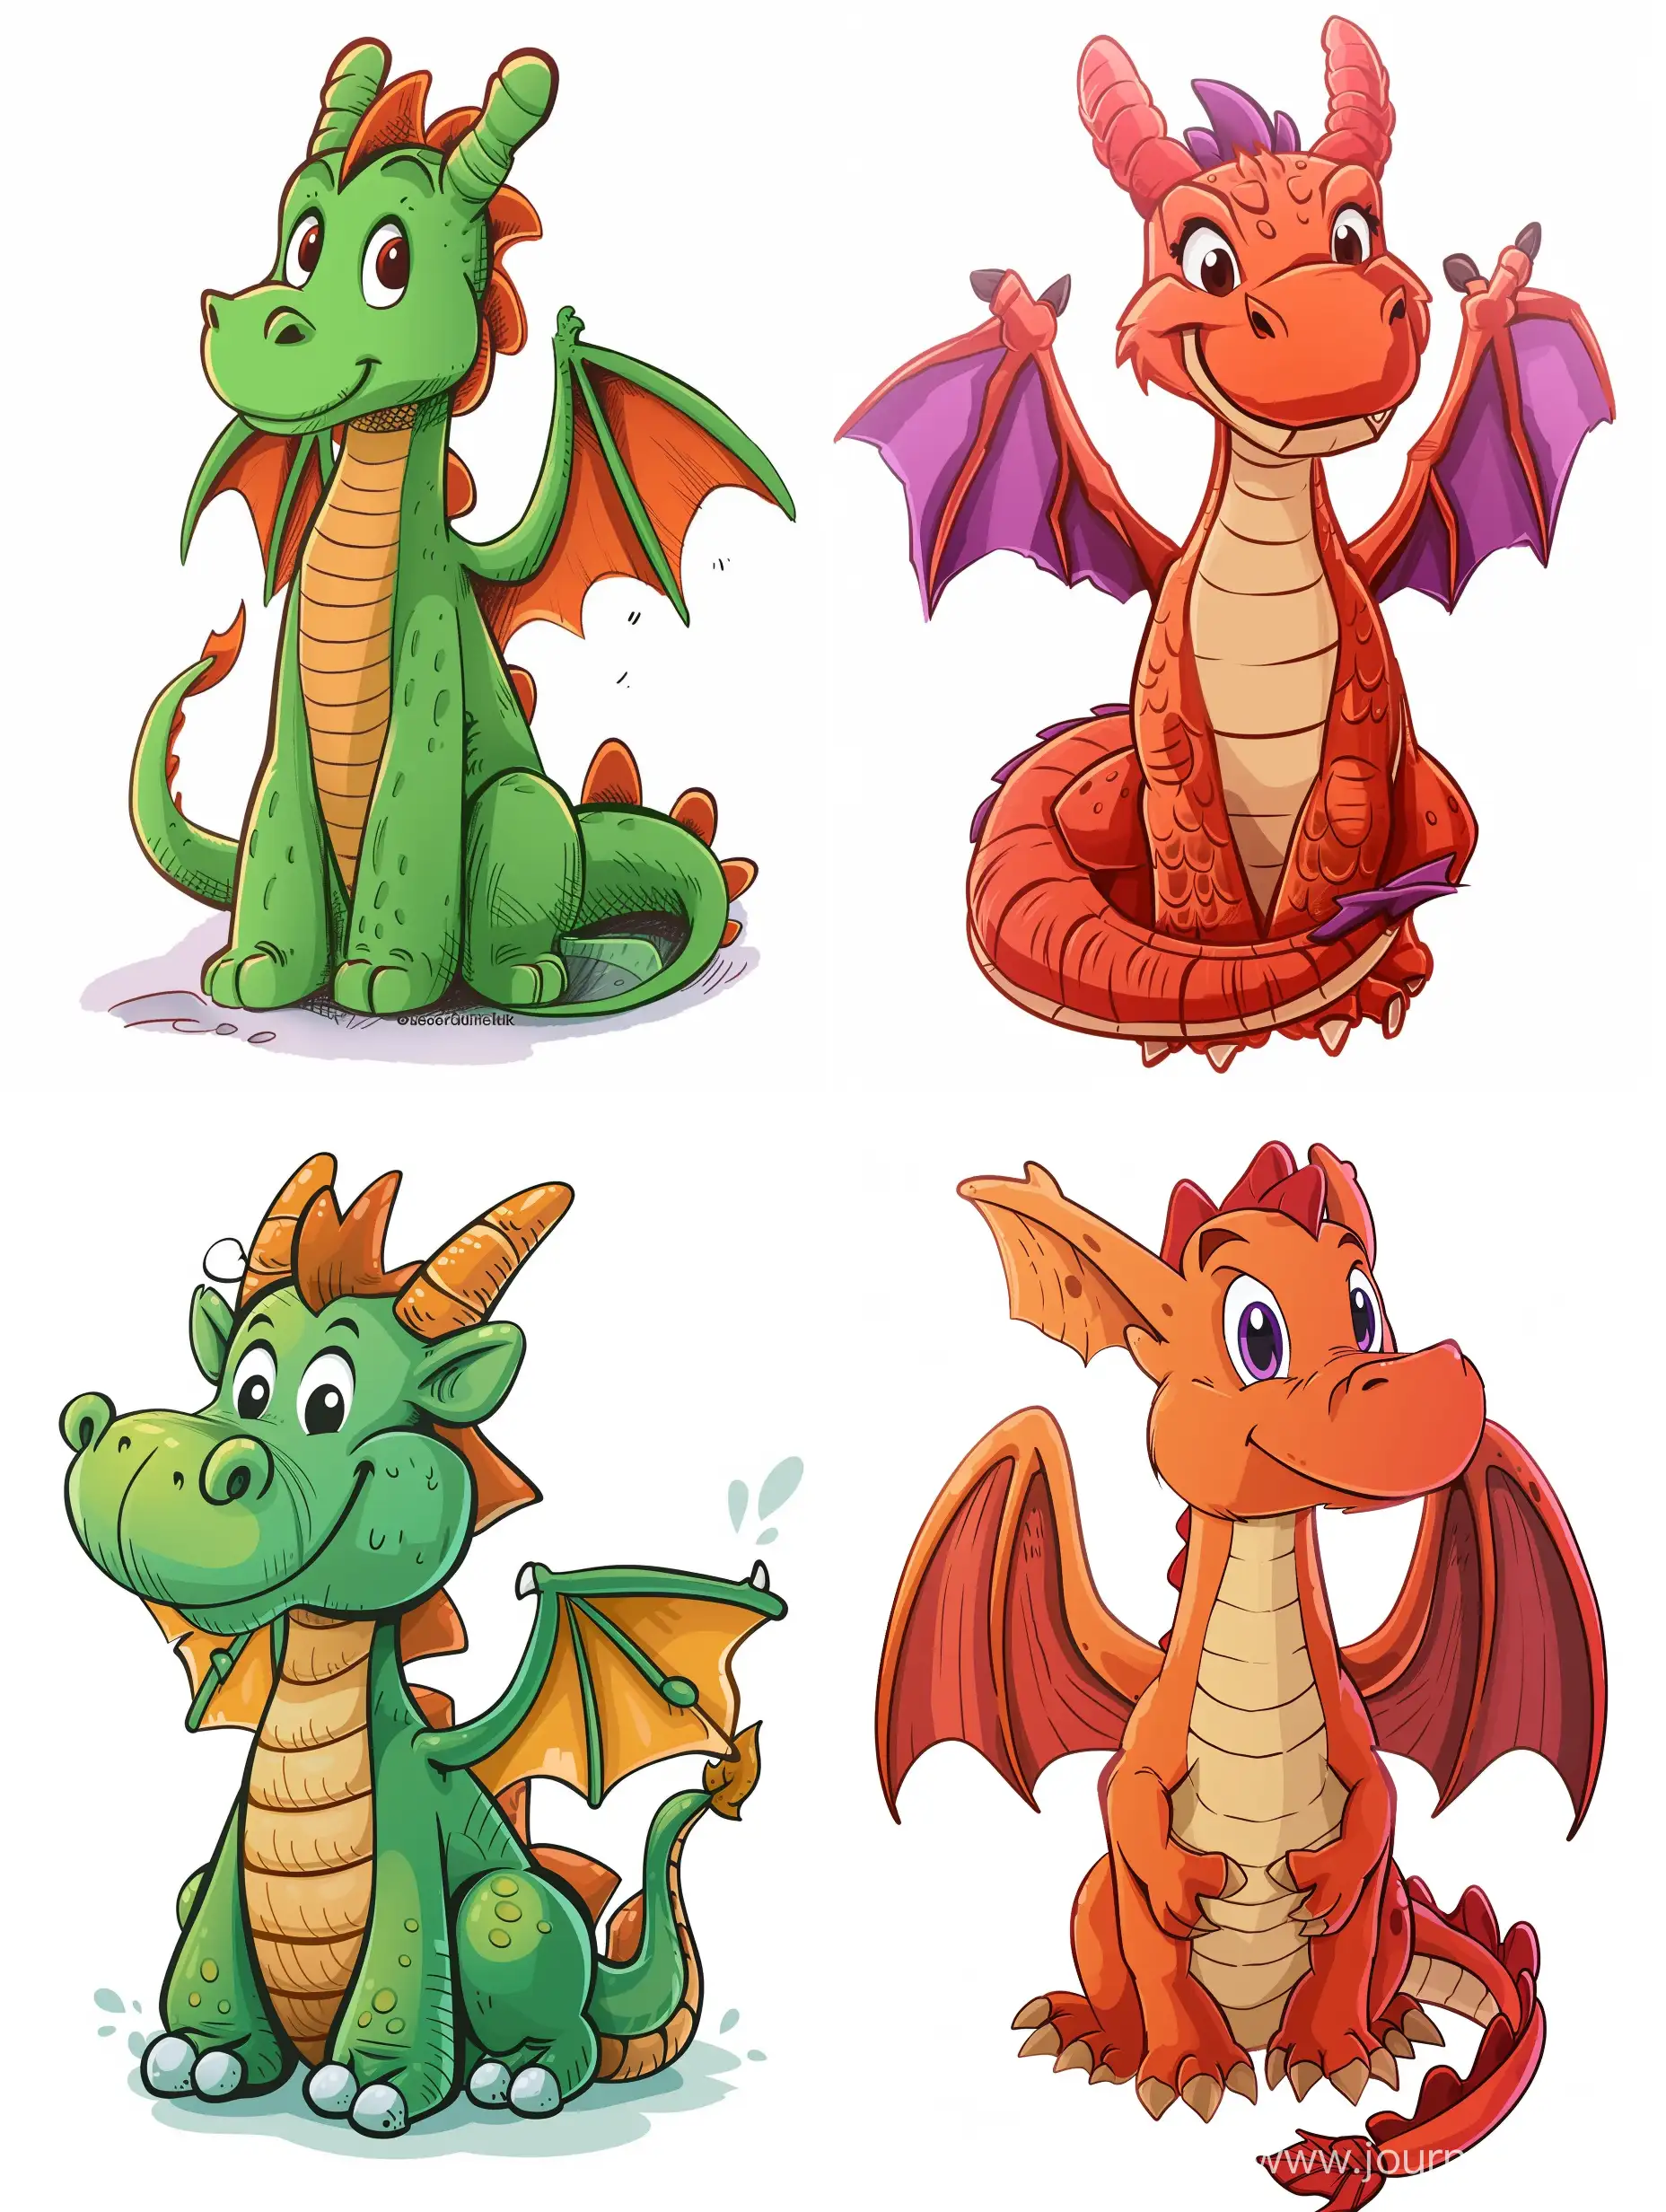 Playful-Cartoon-Dragon-Art-with-Vibrant-Colors-and-Unique-Design